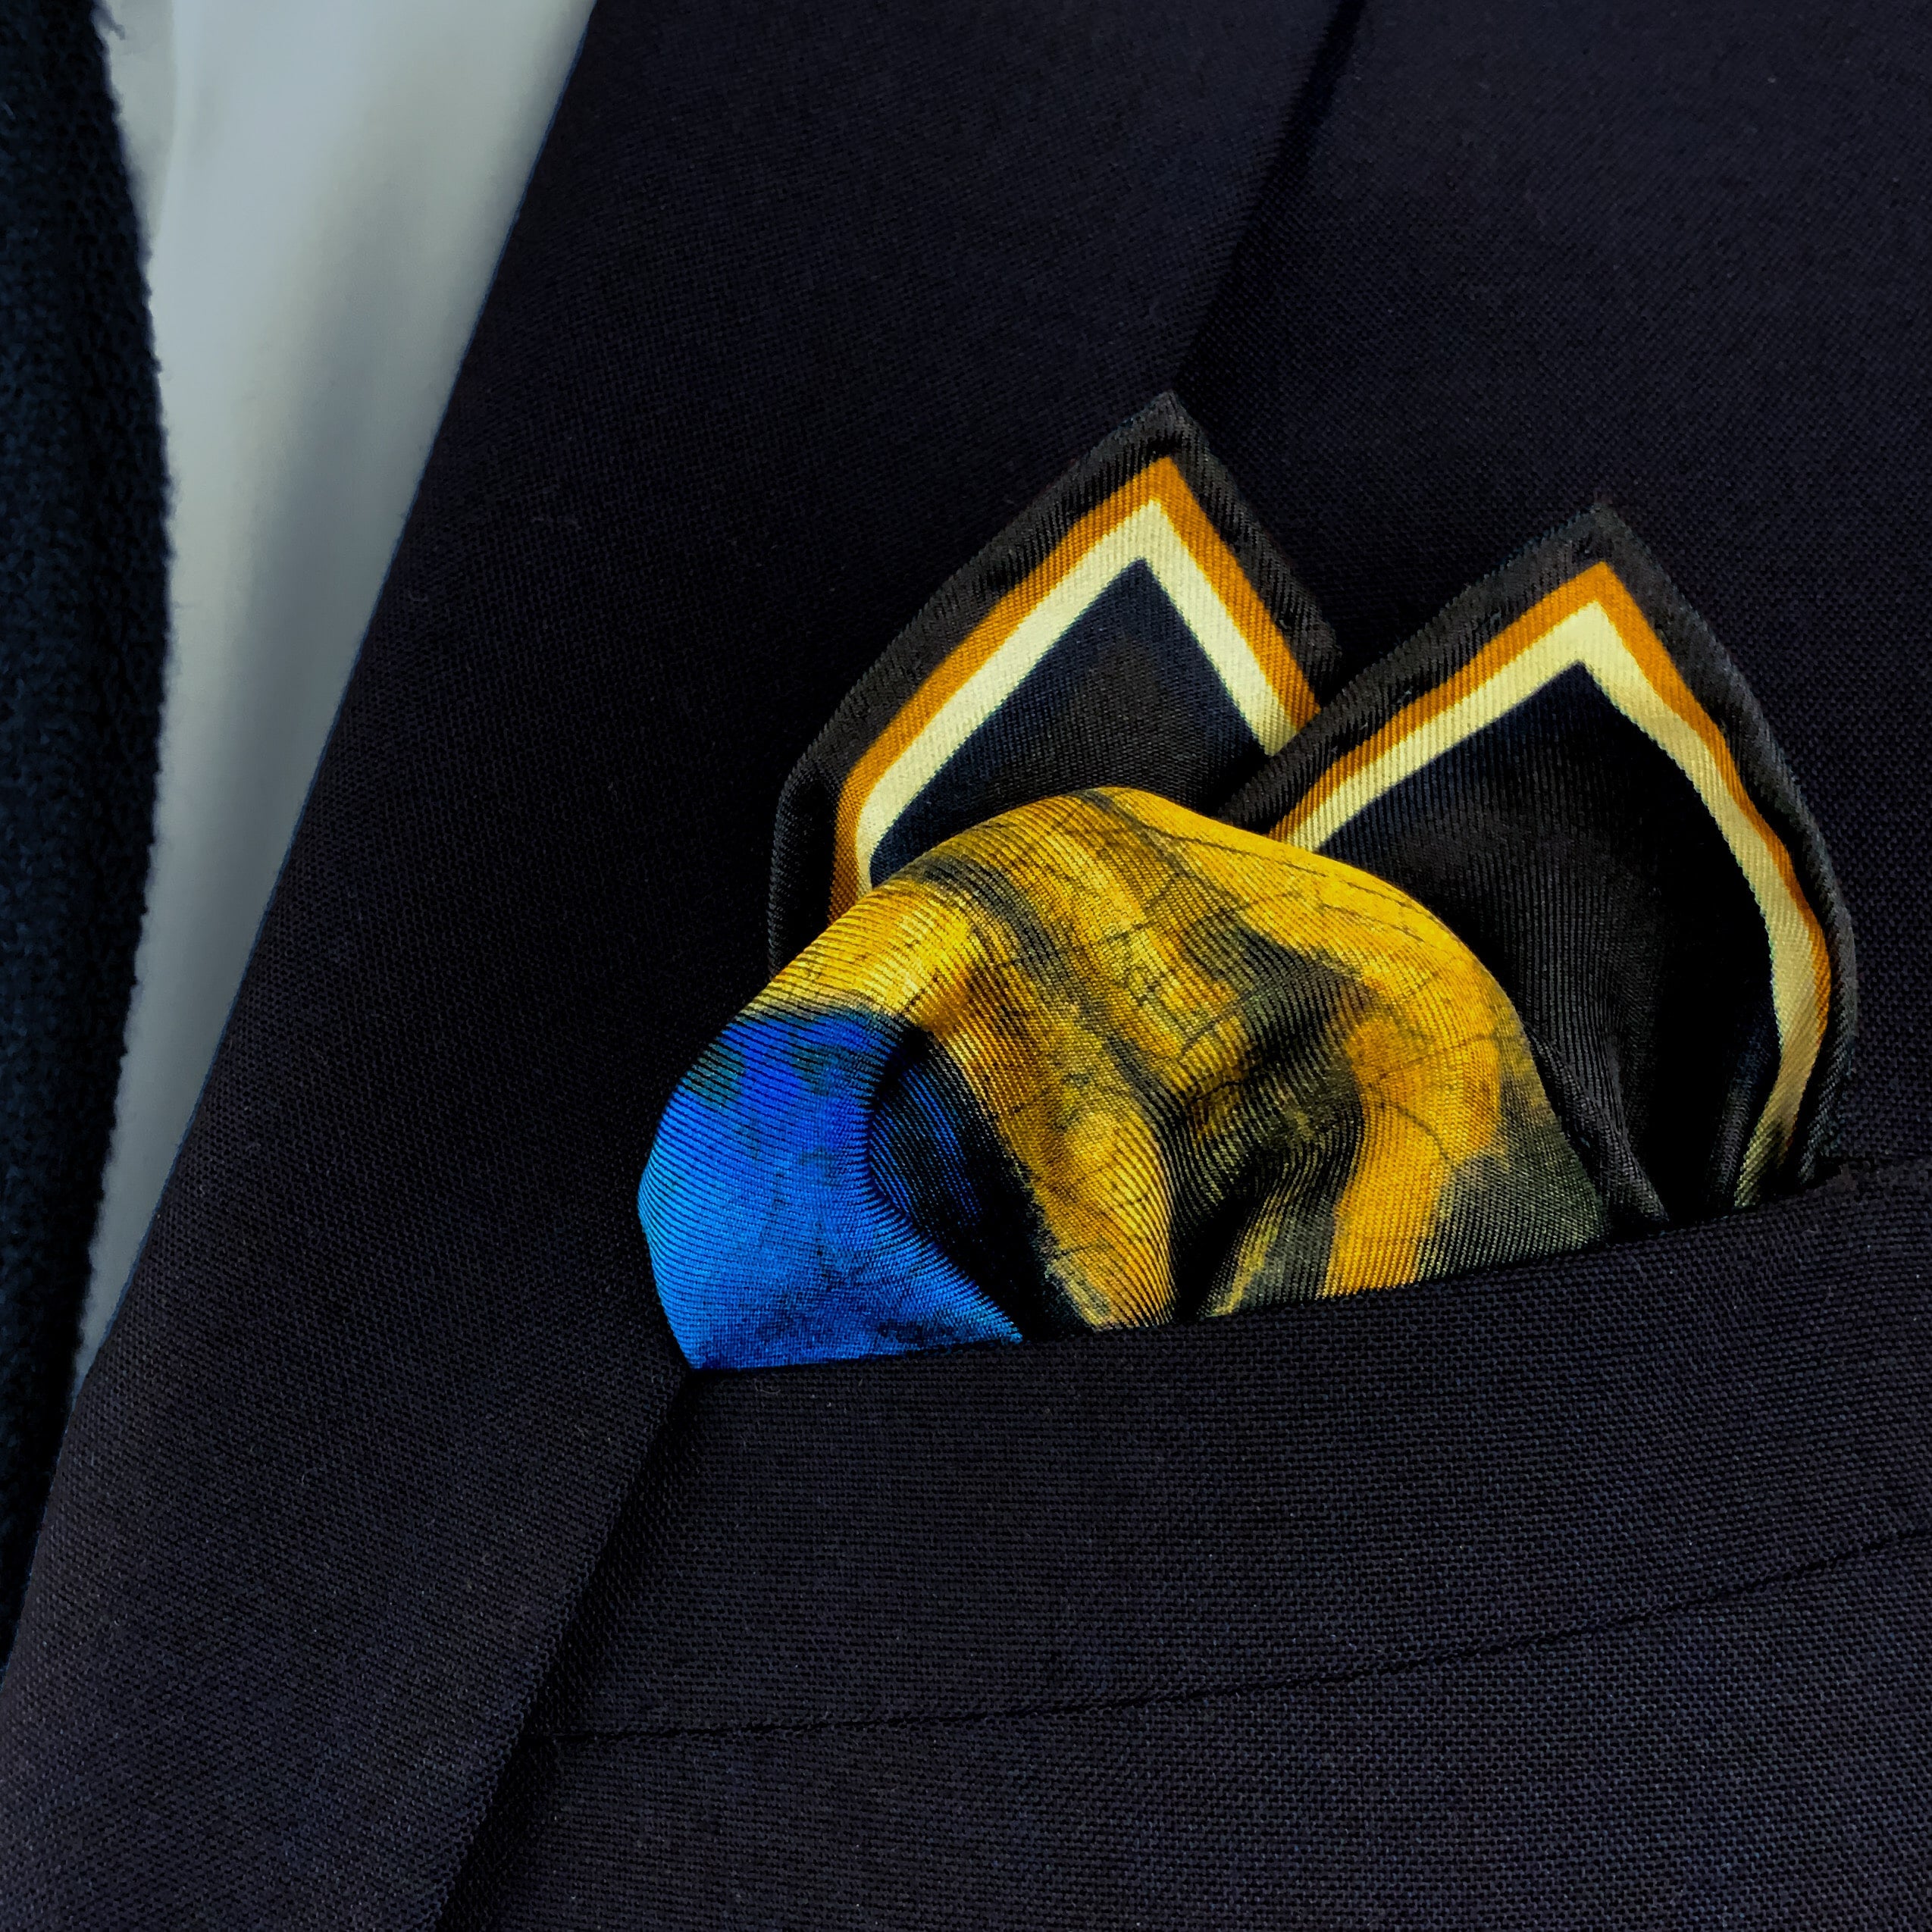 Girl with a pearl earring historical art silk pocket square folded and placed in the breast pocket of a navy blue suit.